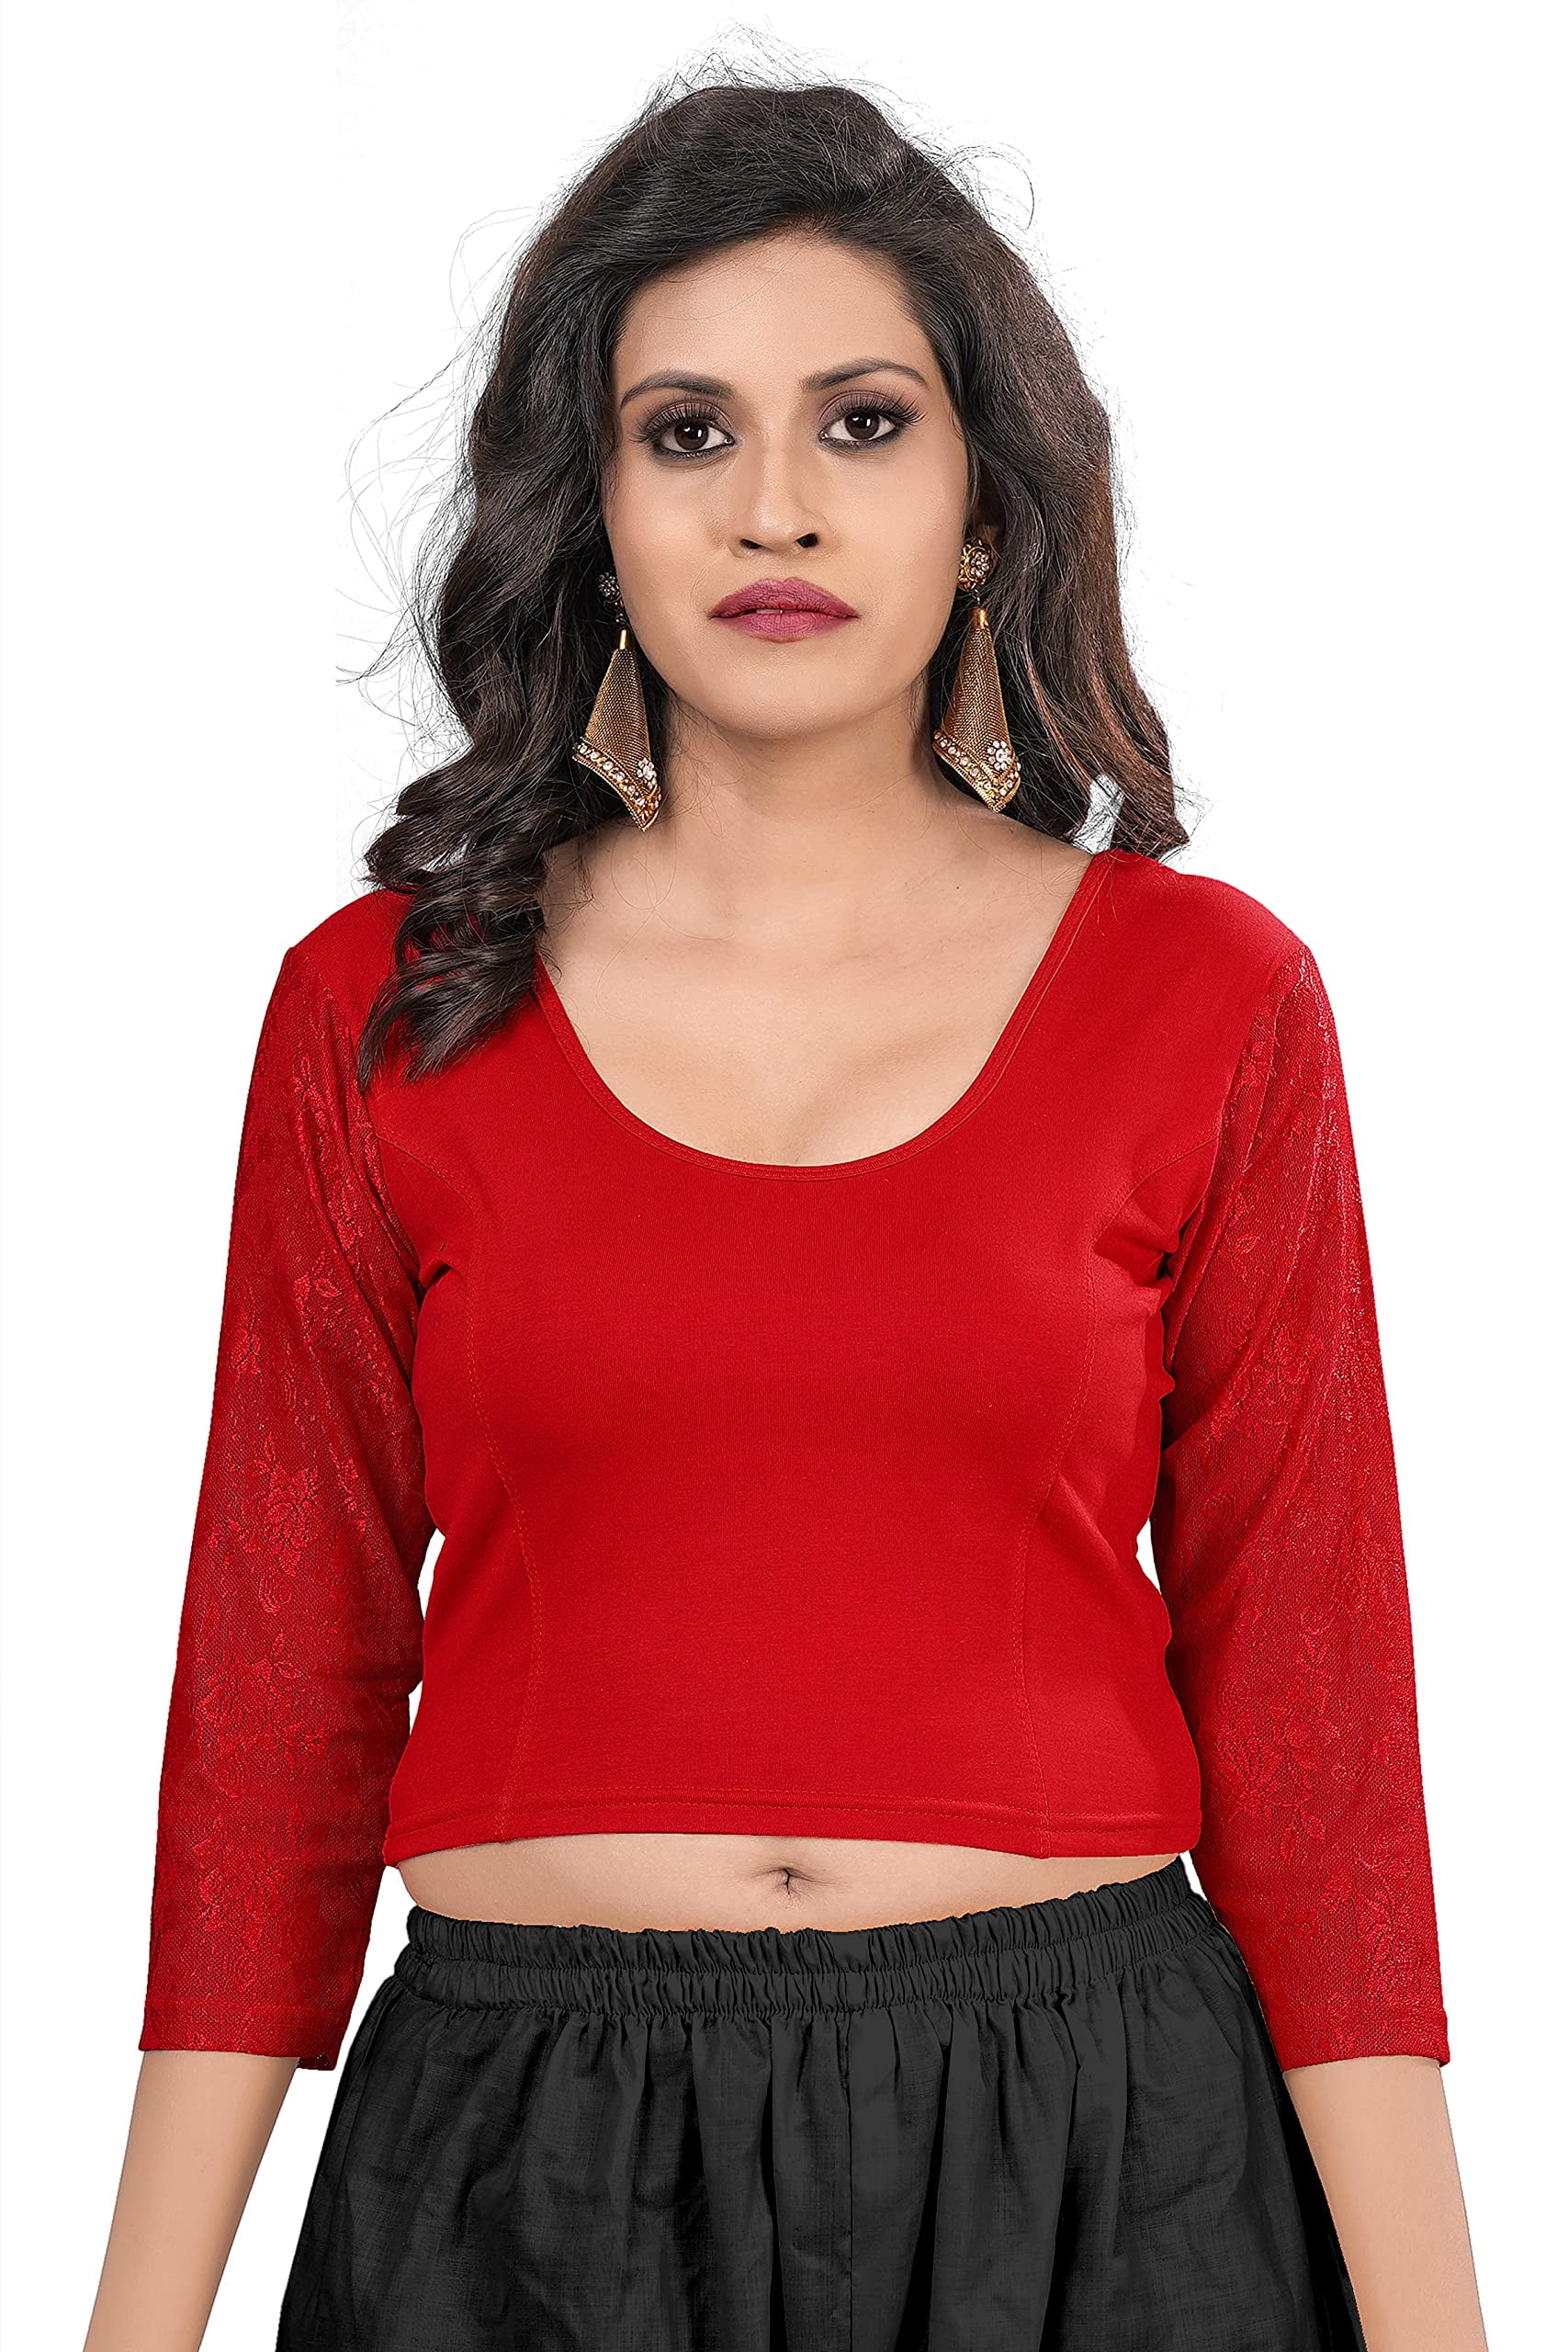 Crazy Bachat Women's Designer Red 3/4 Net Stretch Blouse for Saree Crop ...